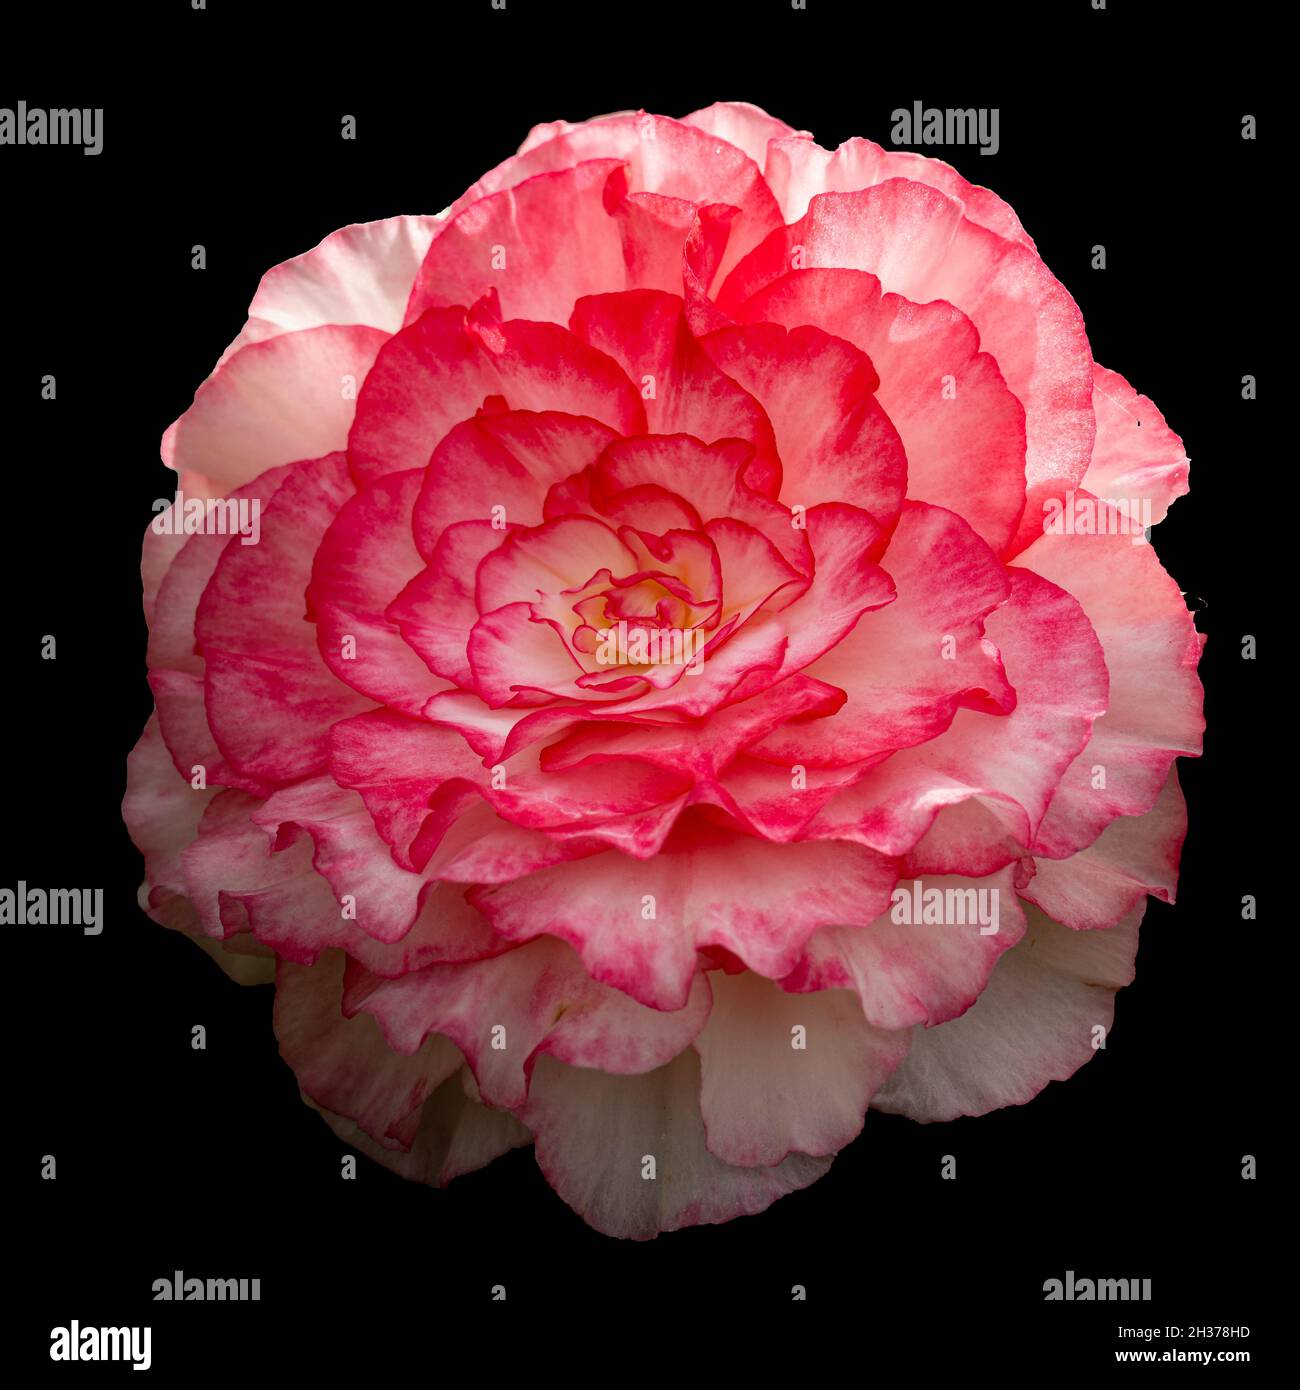 Bright pink Begonia, Begoniaceae petals and flowers in bloom isolated against a black background with shallow depth of field. Stock Photo